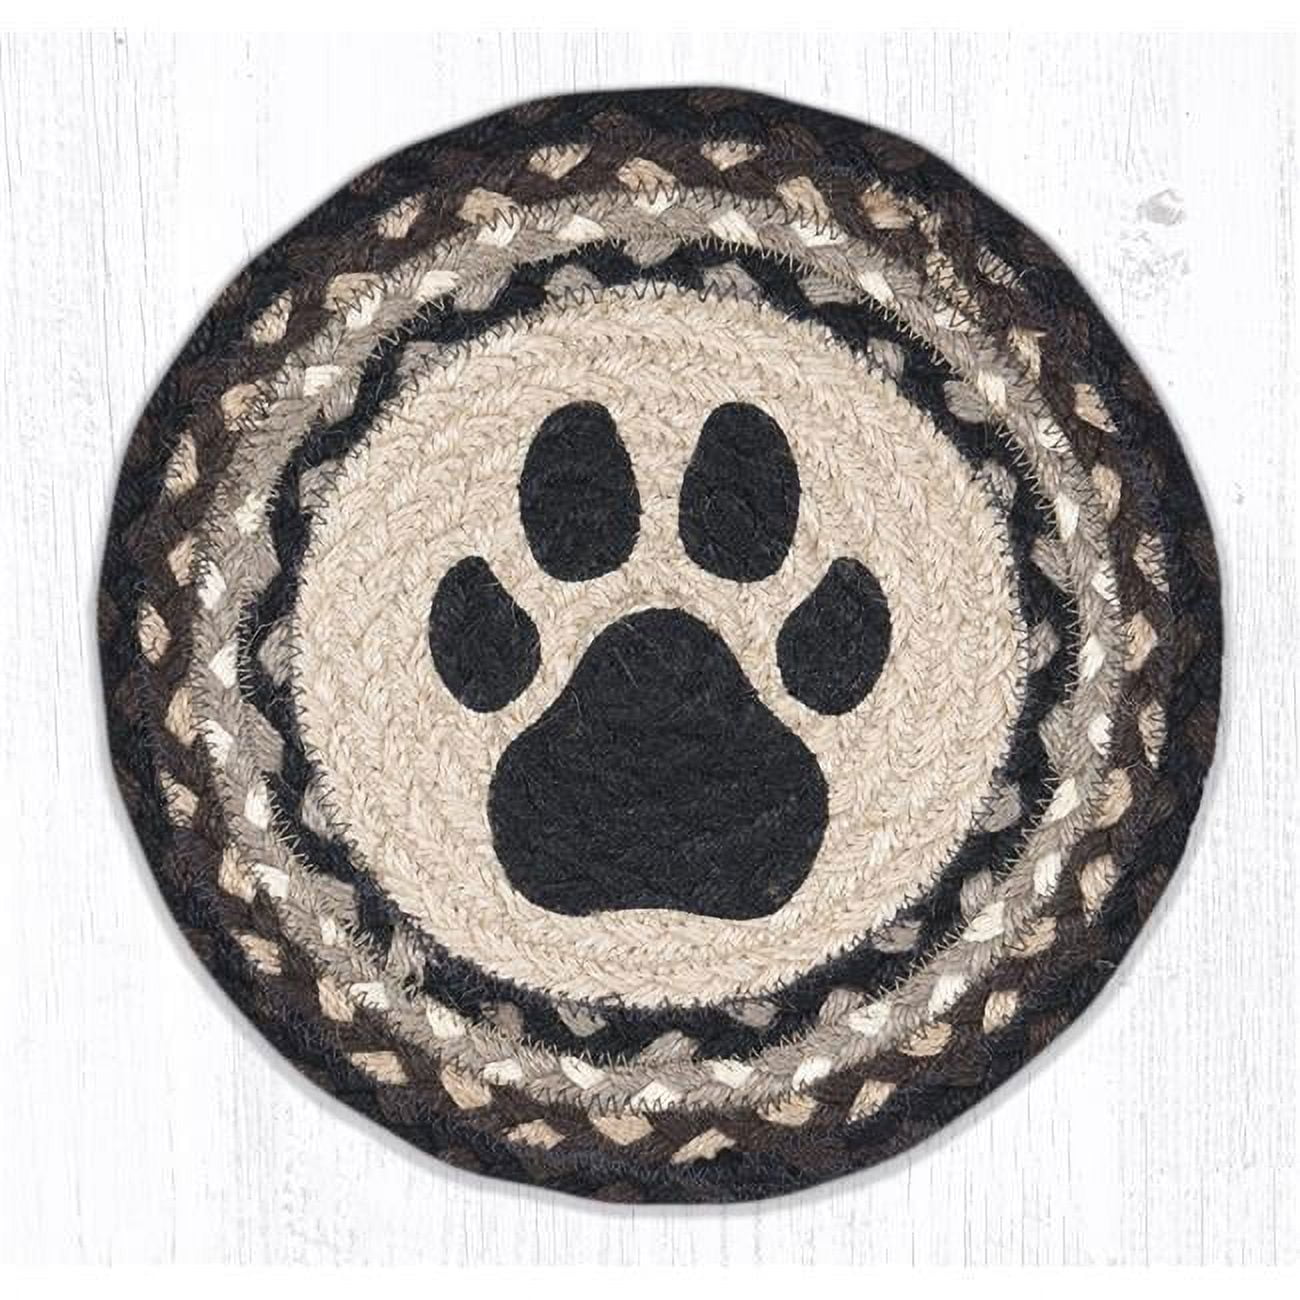 Capitol Importing 80-313dp 10 X 10 In. Mspr-313 Dog Paw Printed Round Trivet